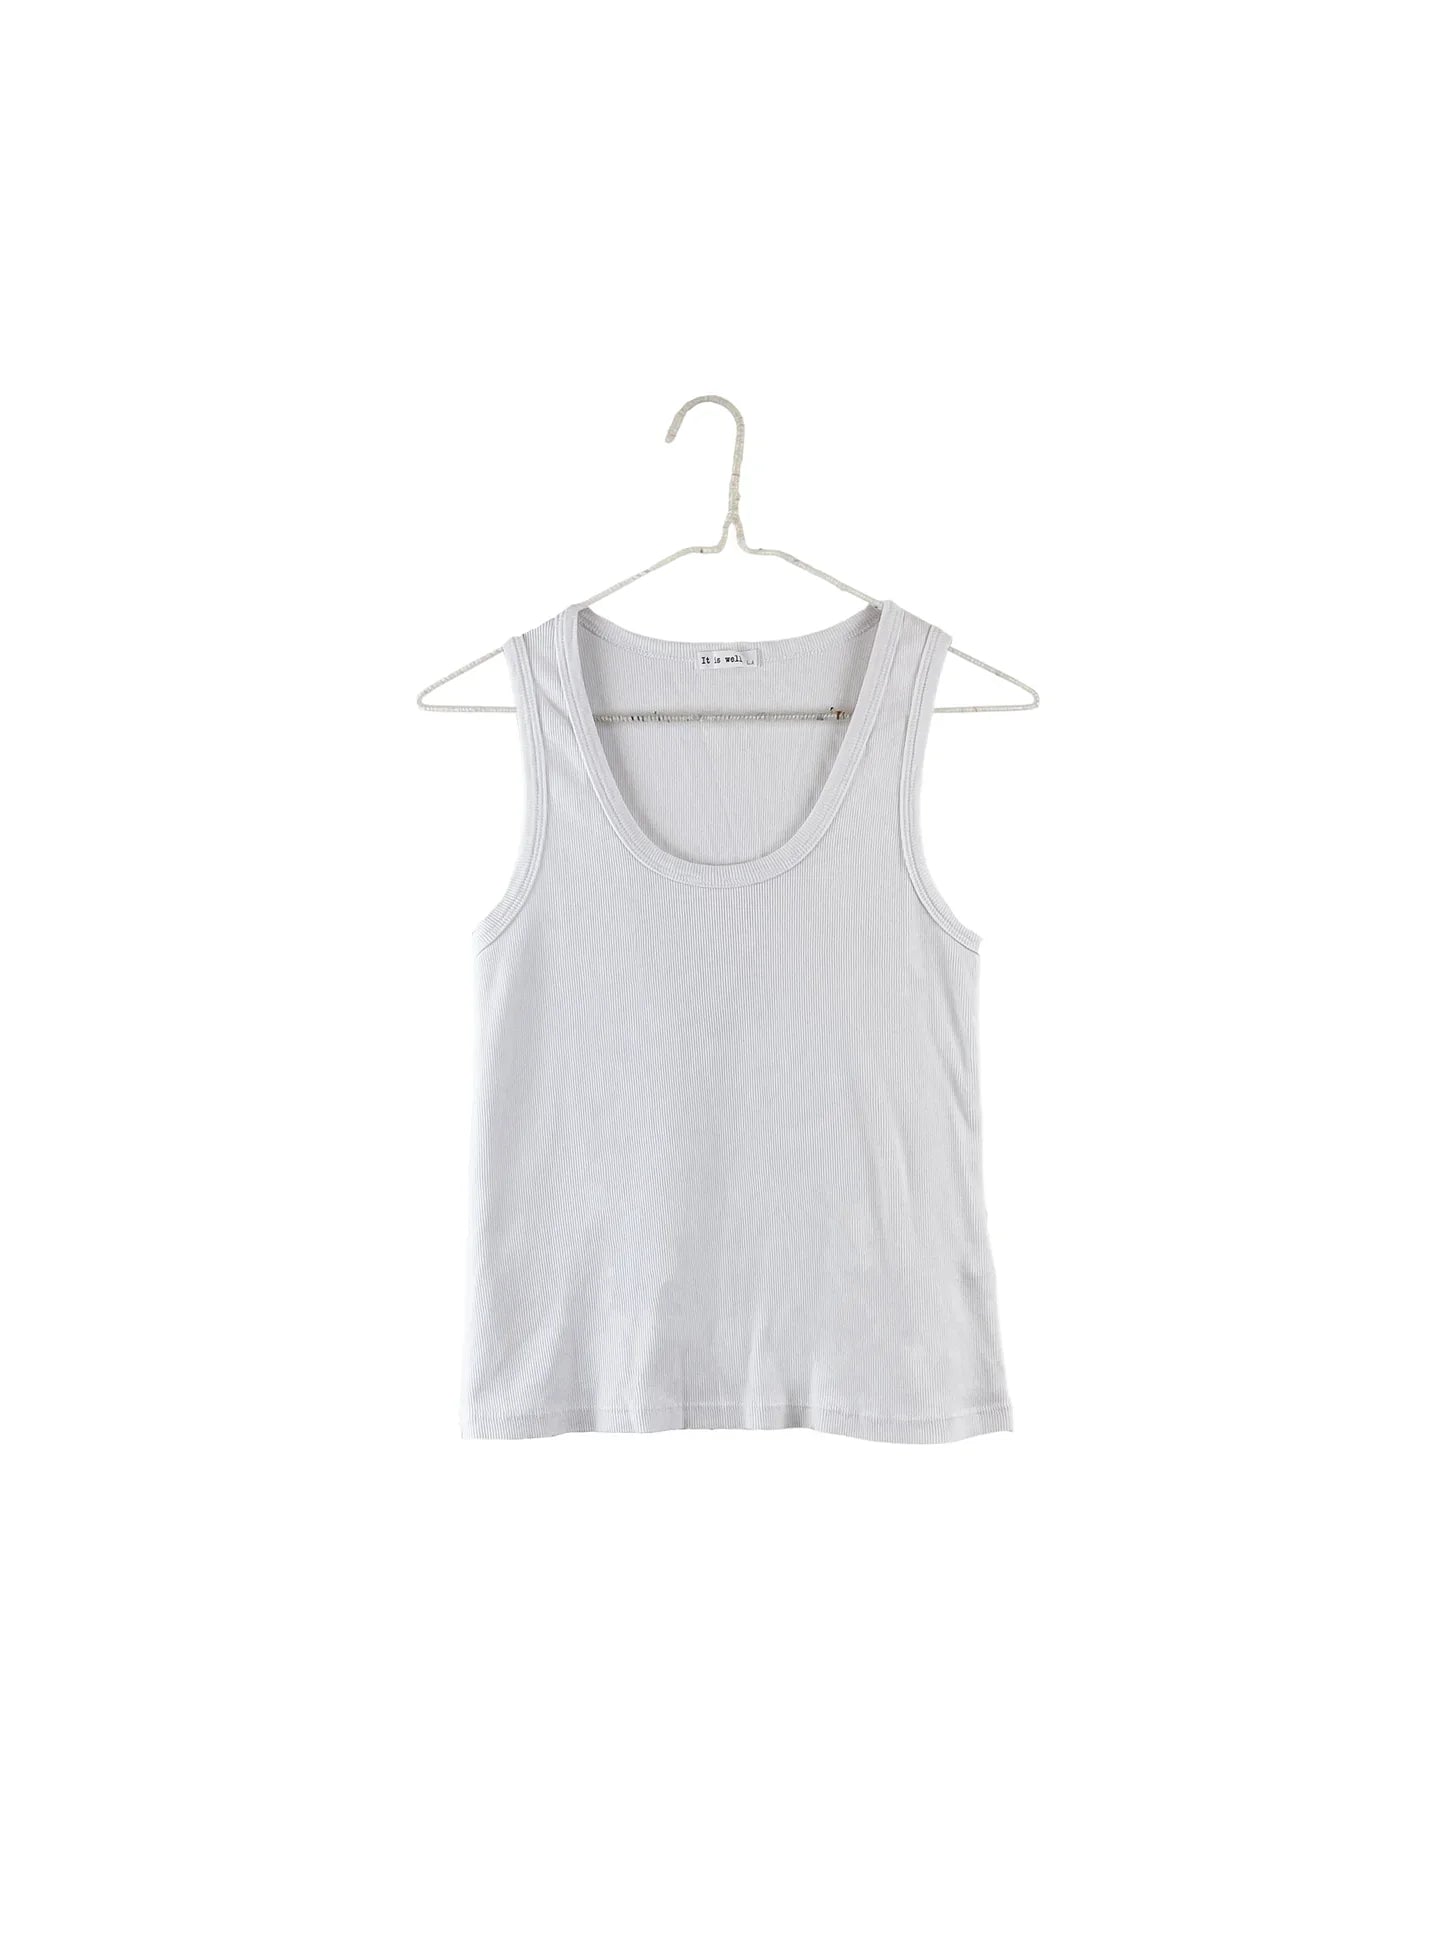 It is Well L.A - SS24 - Rib Tank Top in Salt - on display front 2